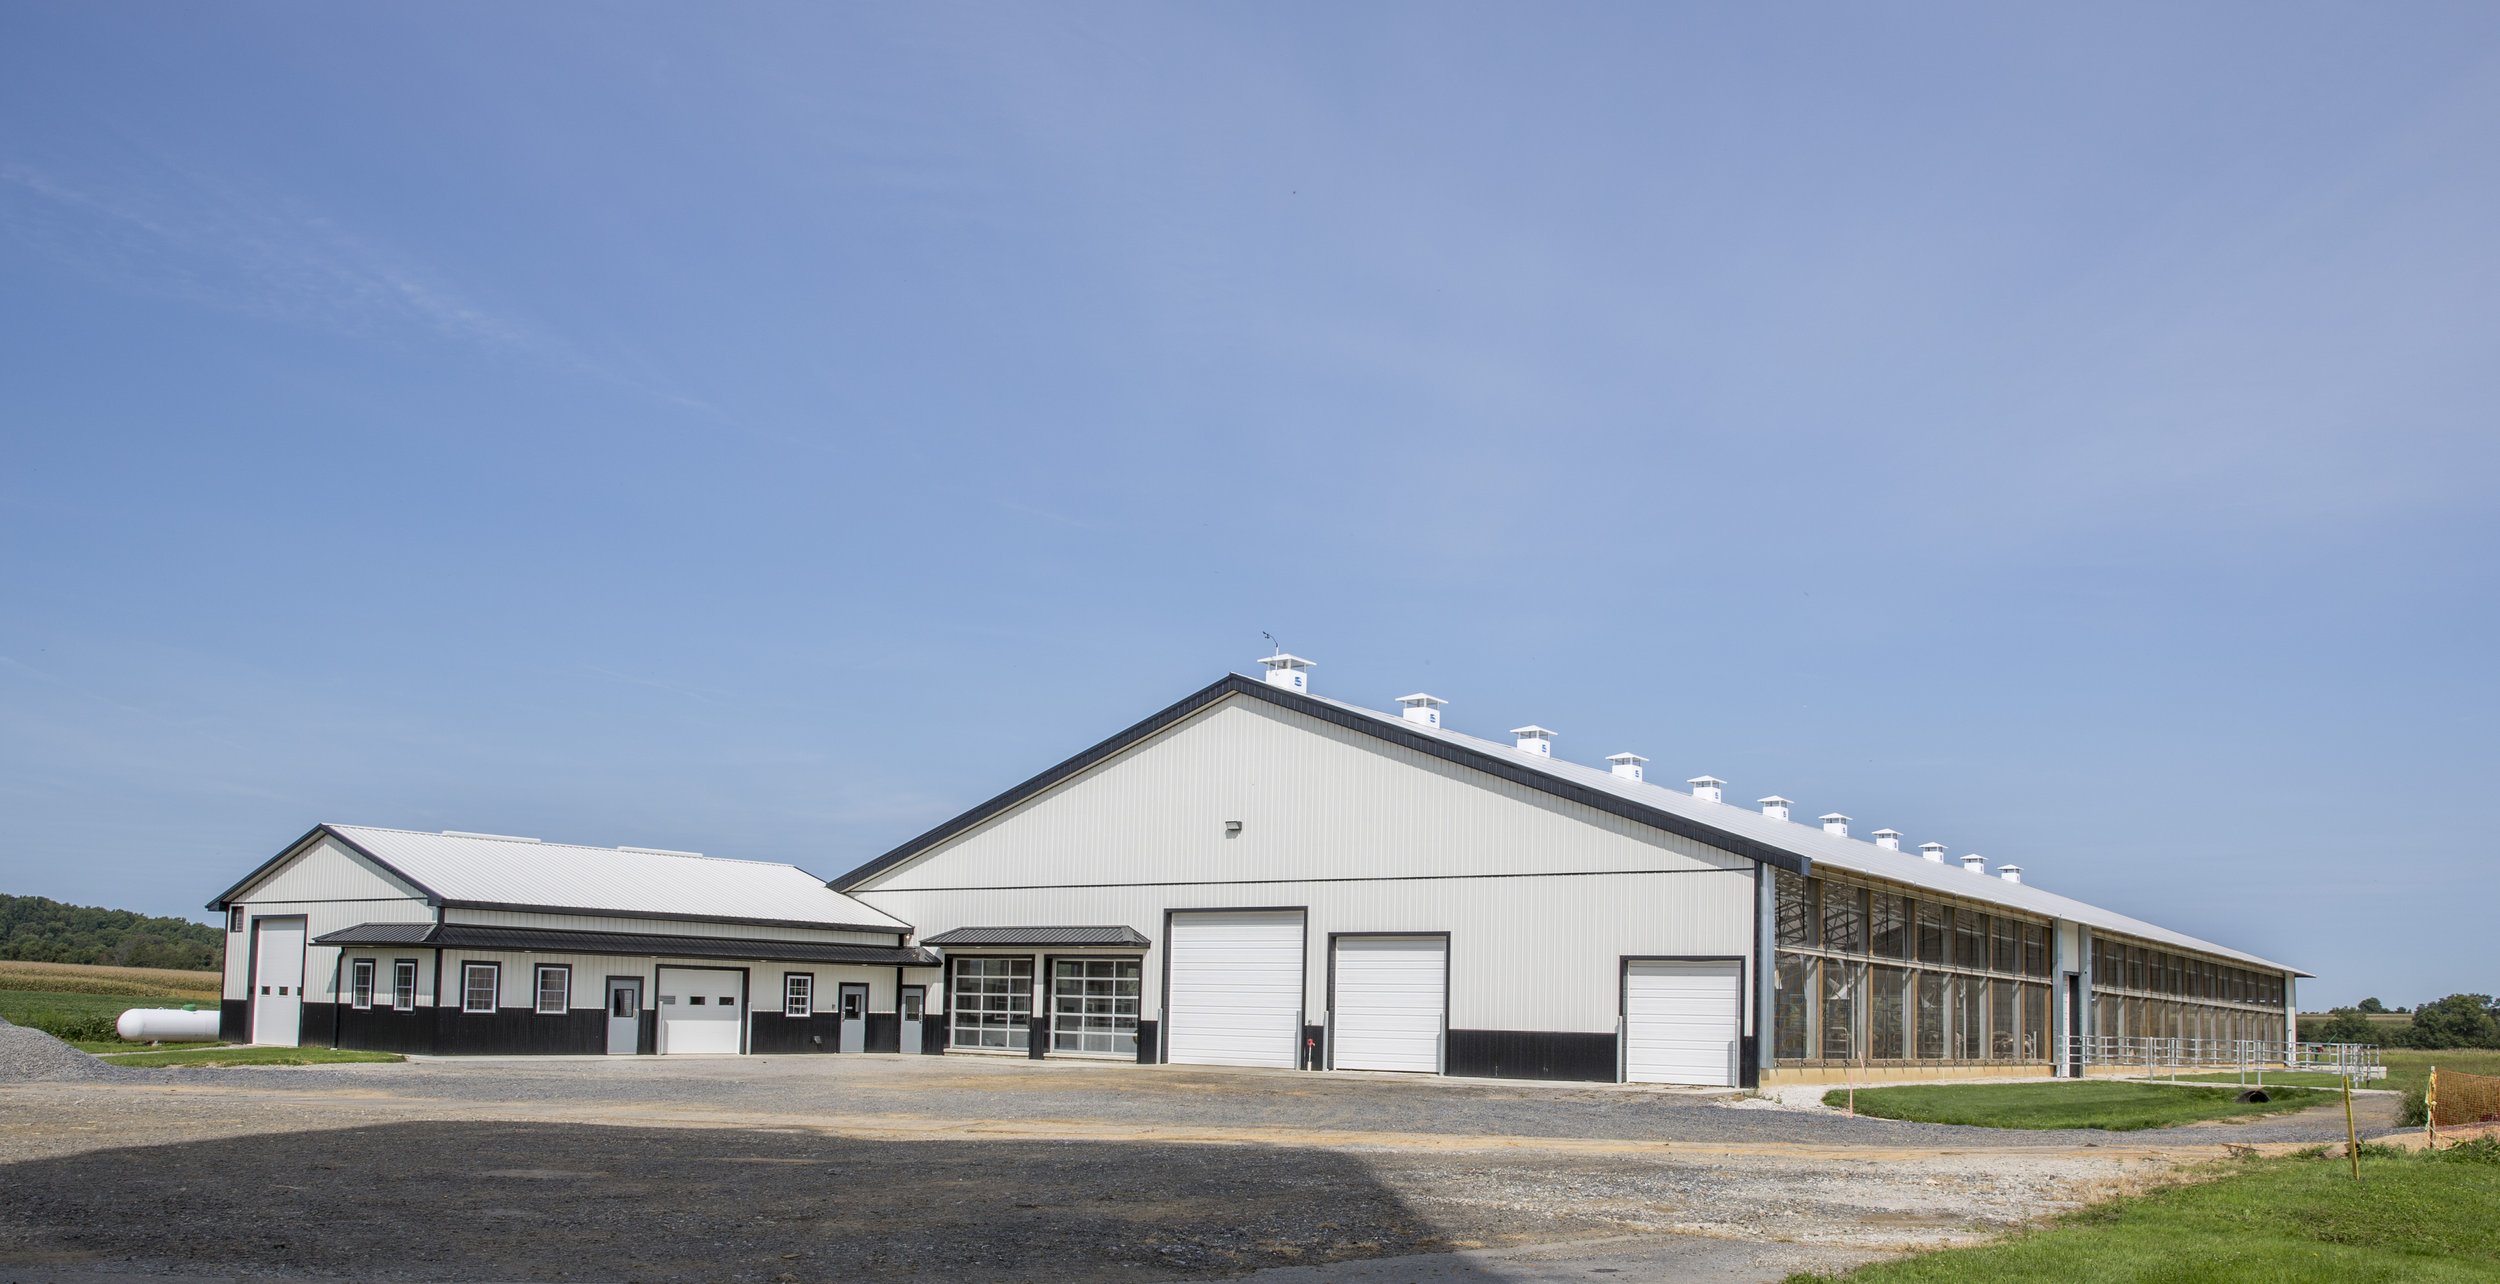  A 102' x 264' freestall fabric roof dairy barn in Elverson, Pennsylvania. 